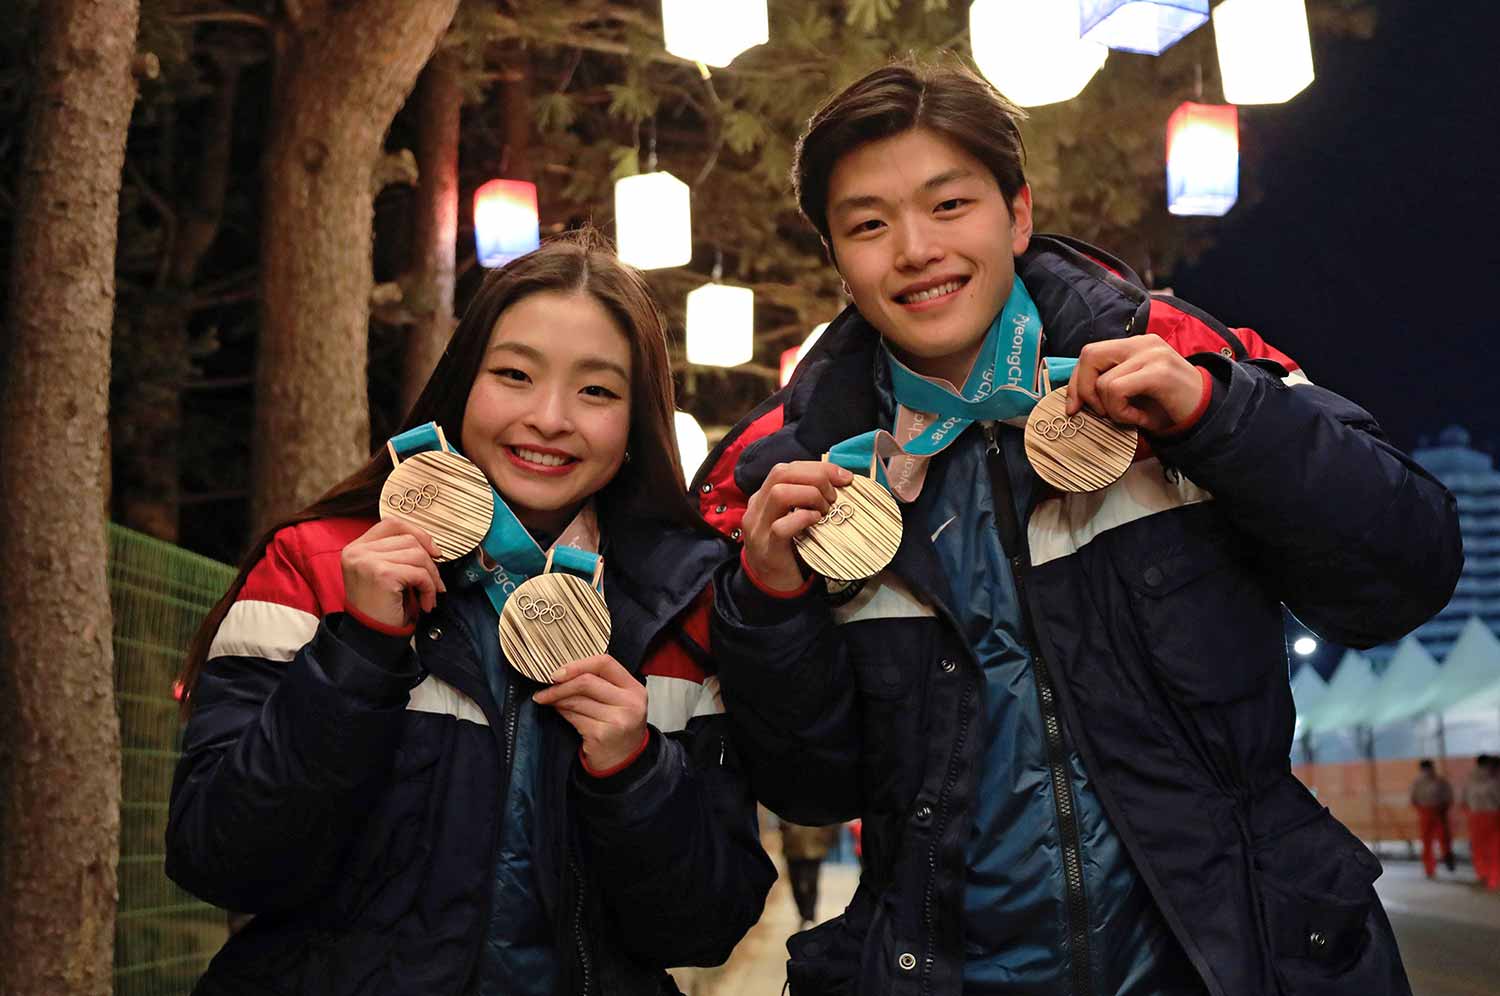 A young woman and a young man smile and hold up two Olympic medals each.